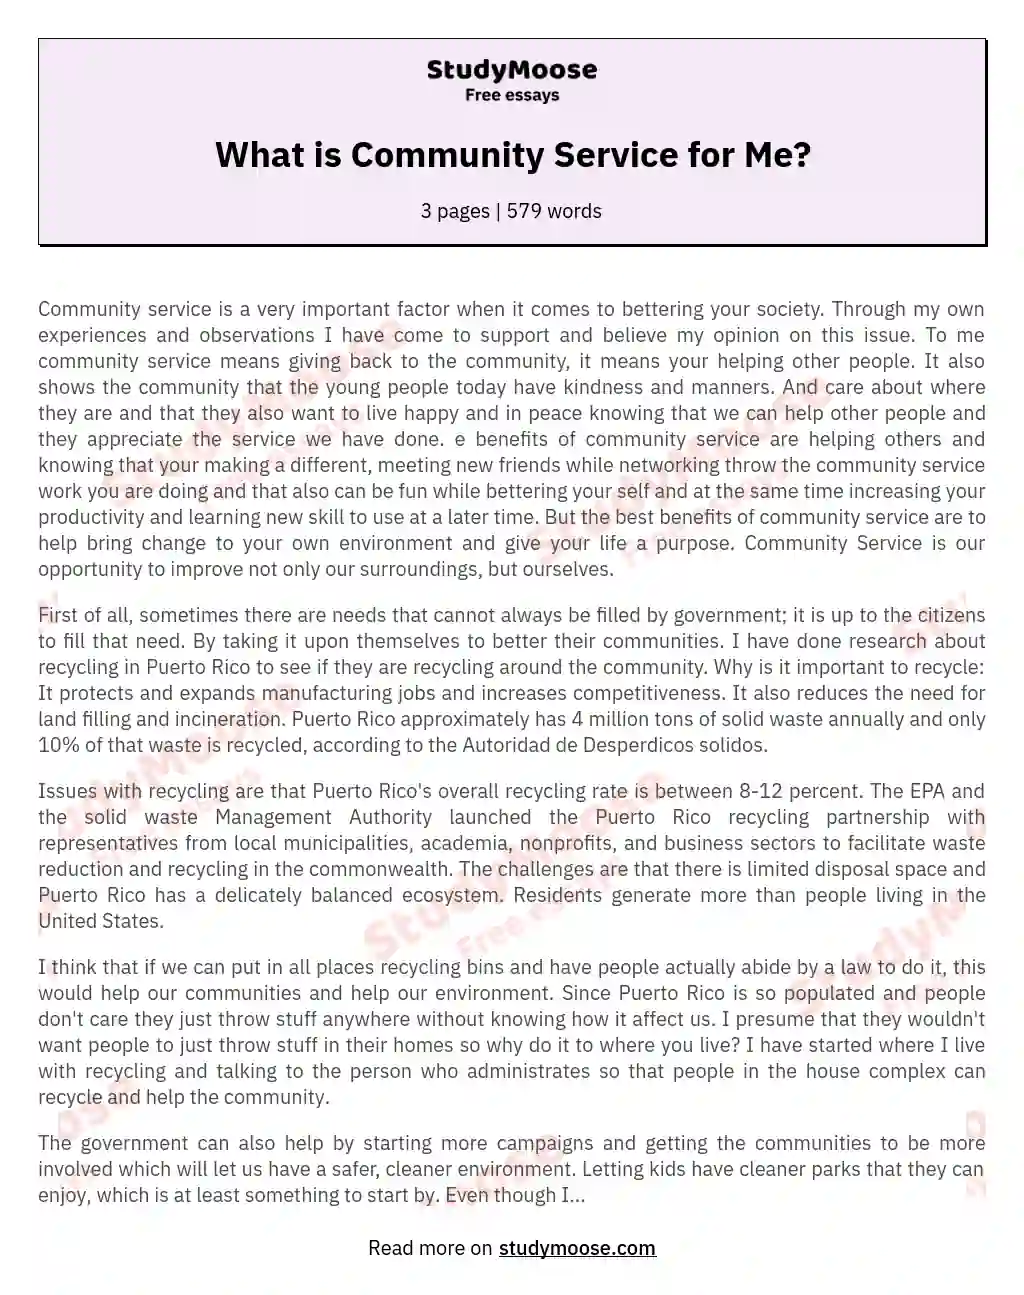 What is Community Service for Me? essay